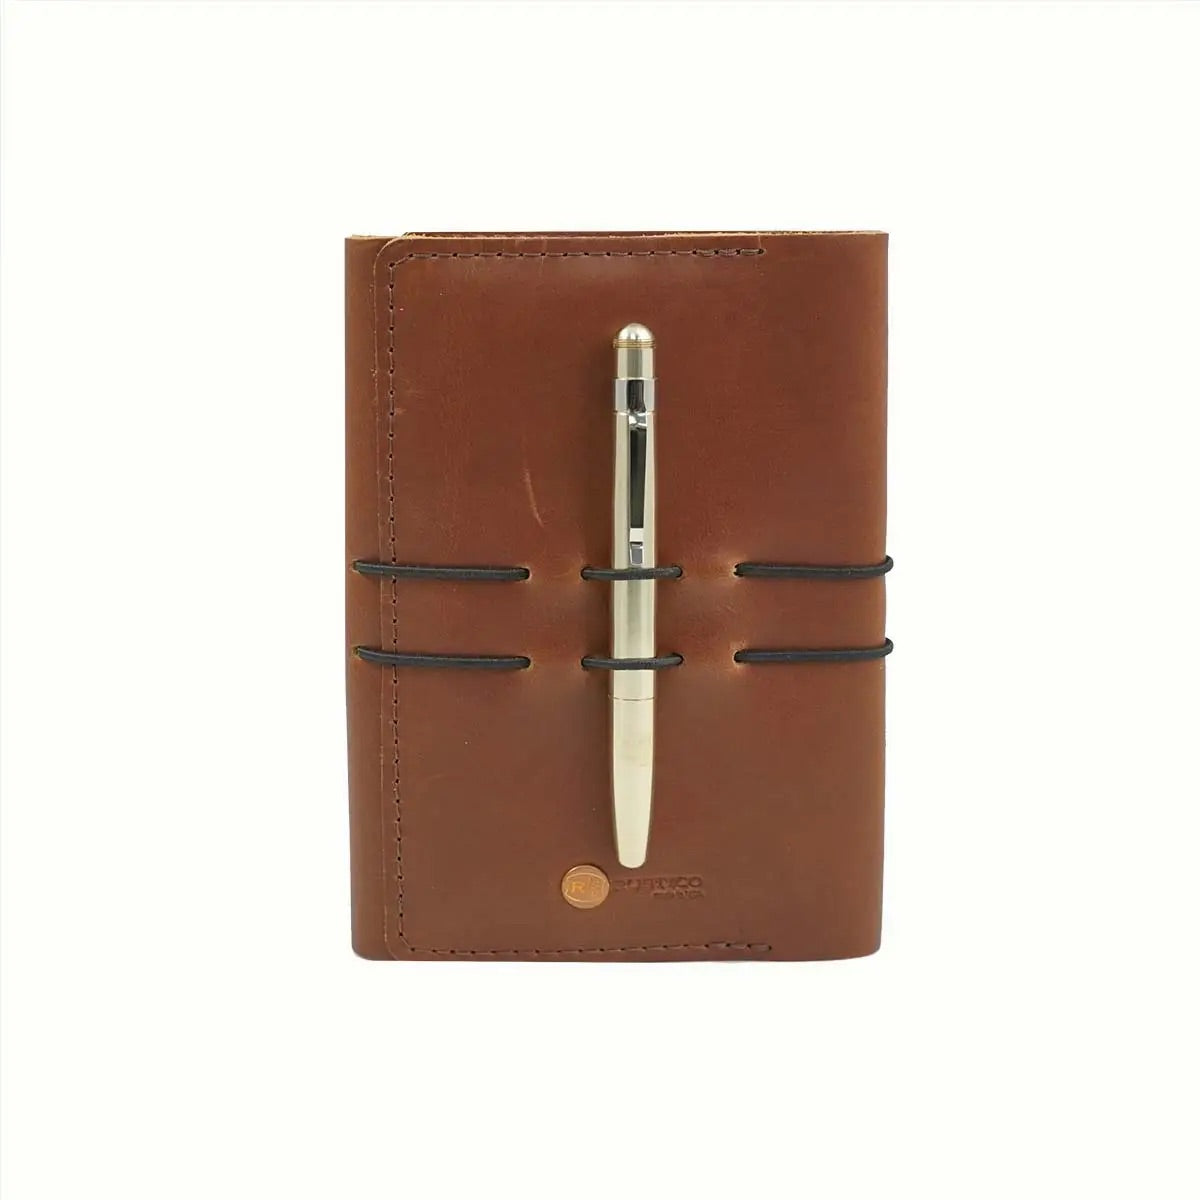 Moleskine Classic Pocket Leather Notebook Cover 3.5" x 5.5"